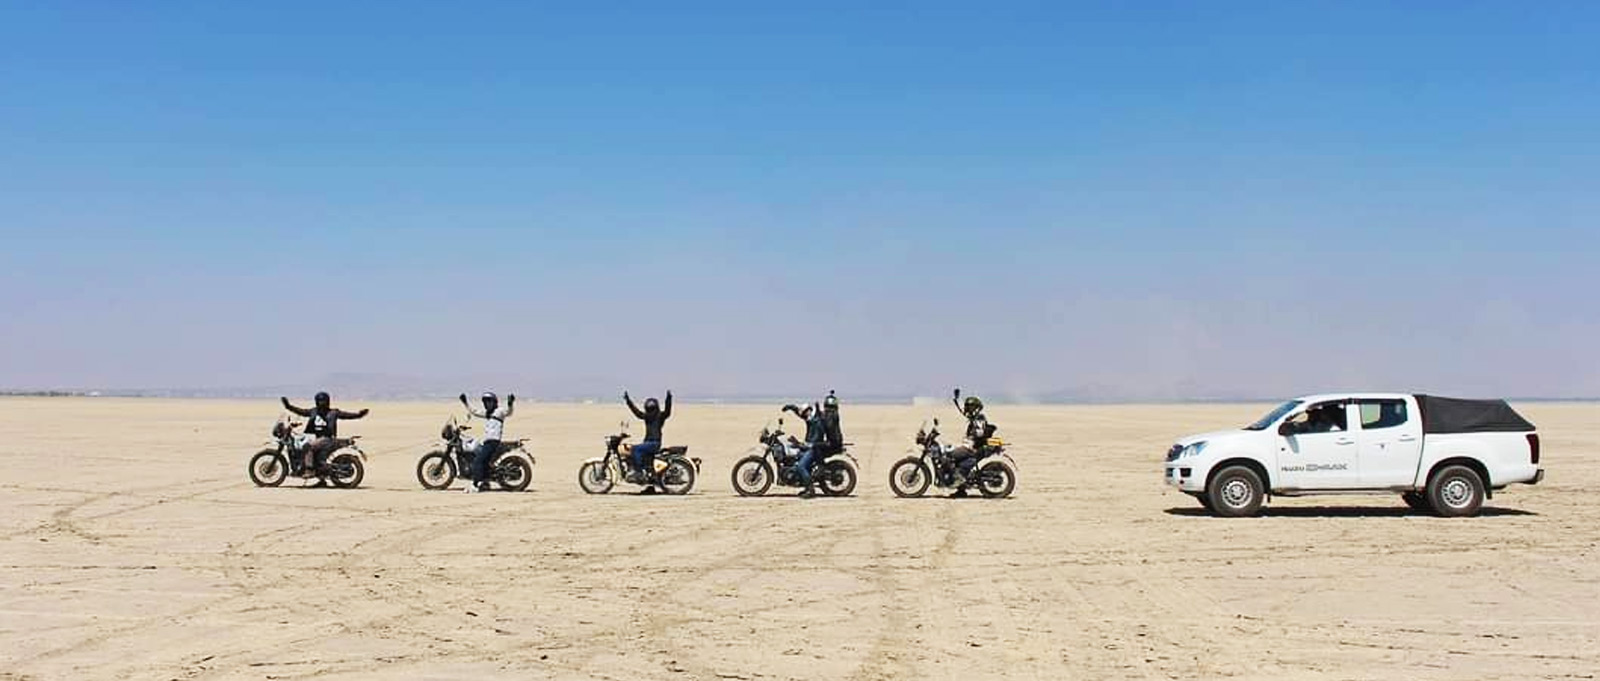 Motorcycle Riding Experience in Maharajas State Rajasthan